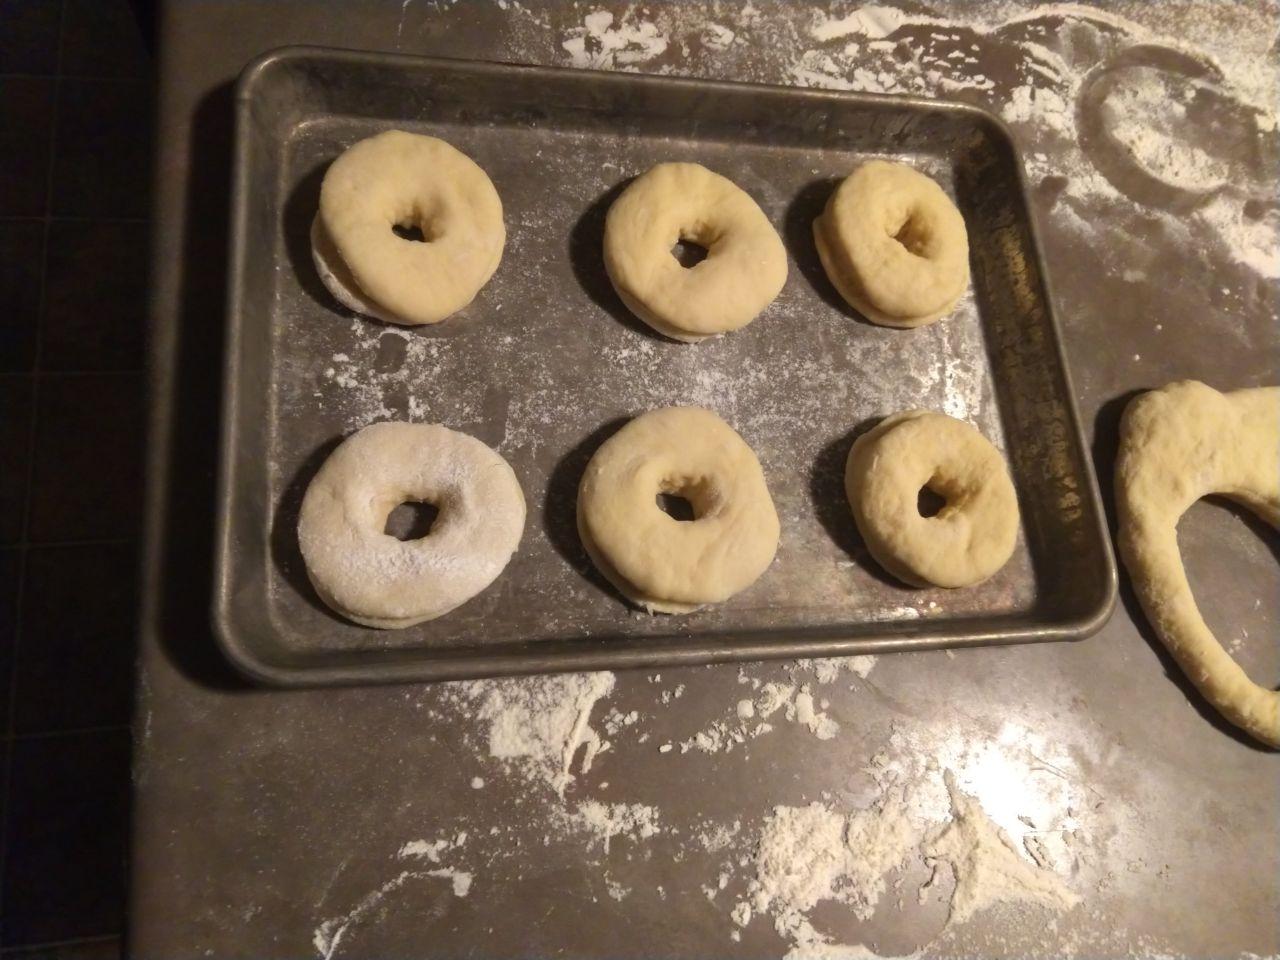 Donuts cut to shape, ready to rise.